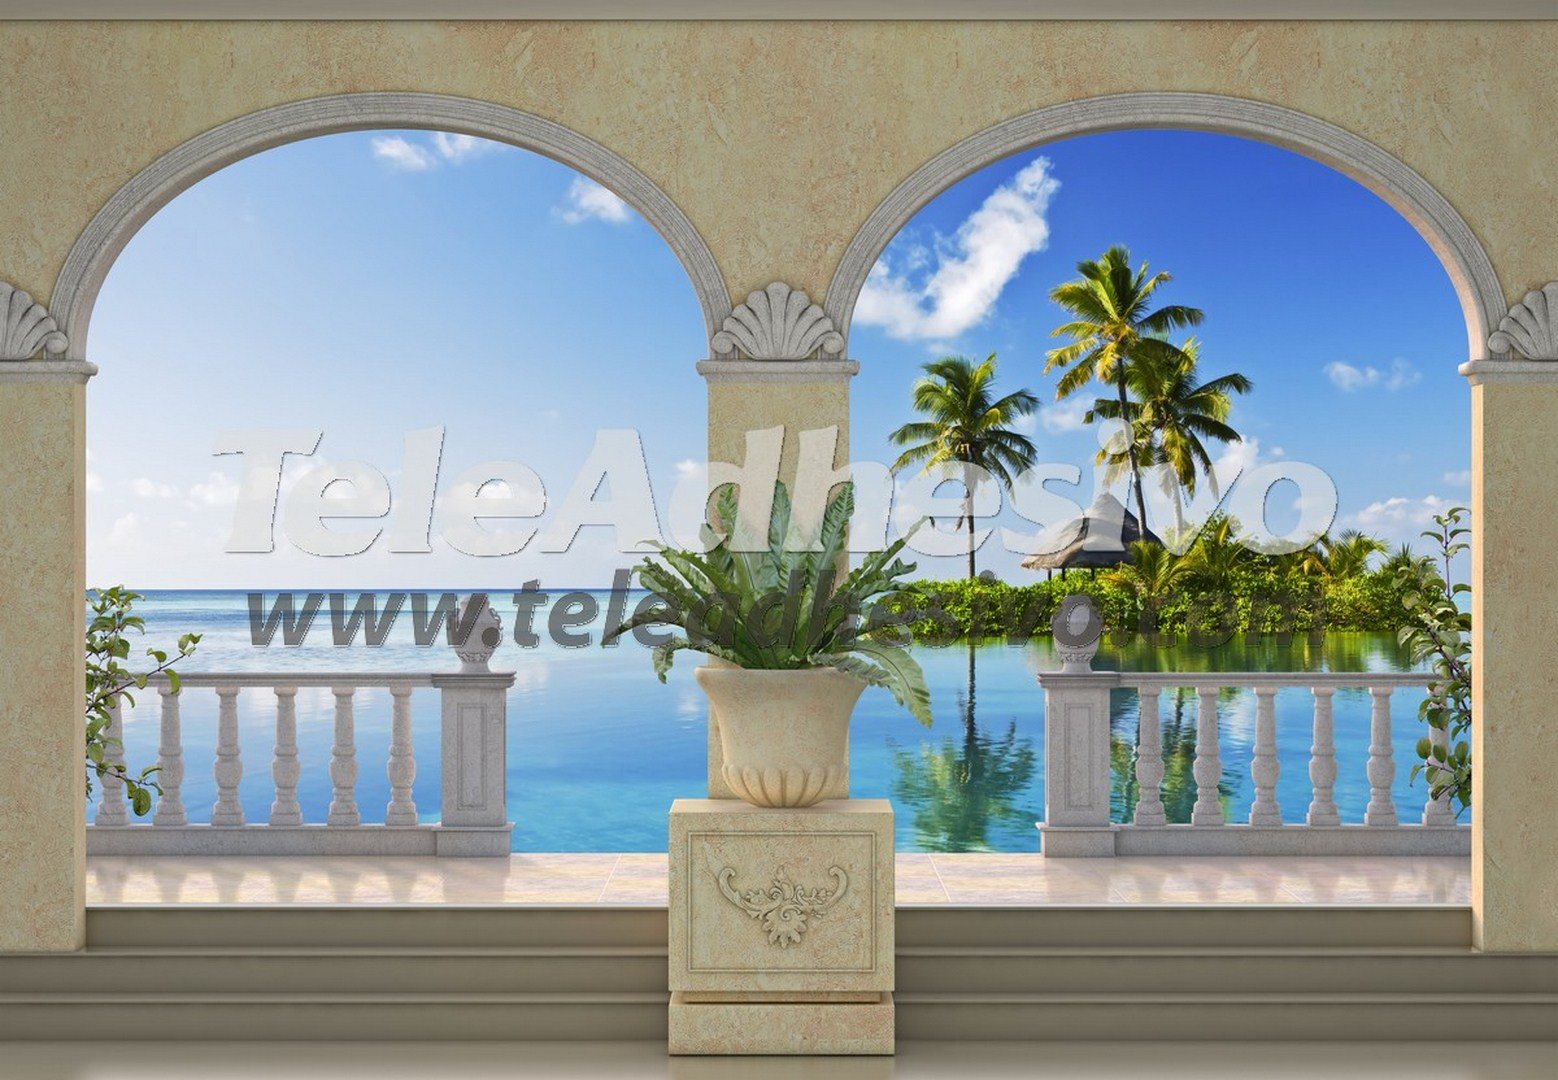 Wall Murals: Small island in the Caribbean